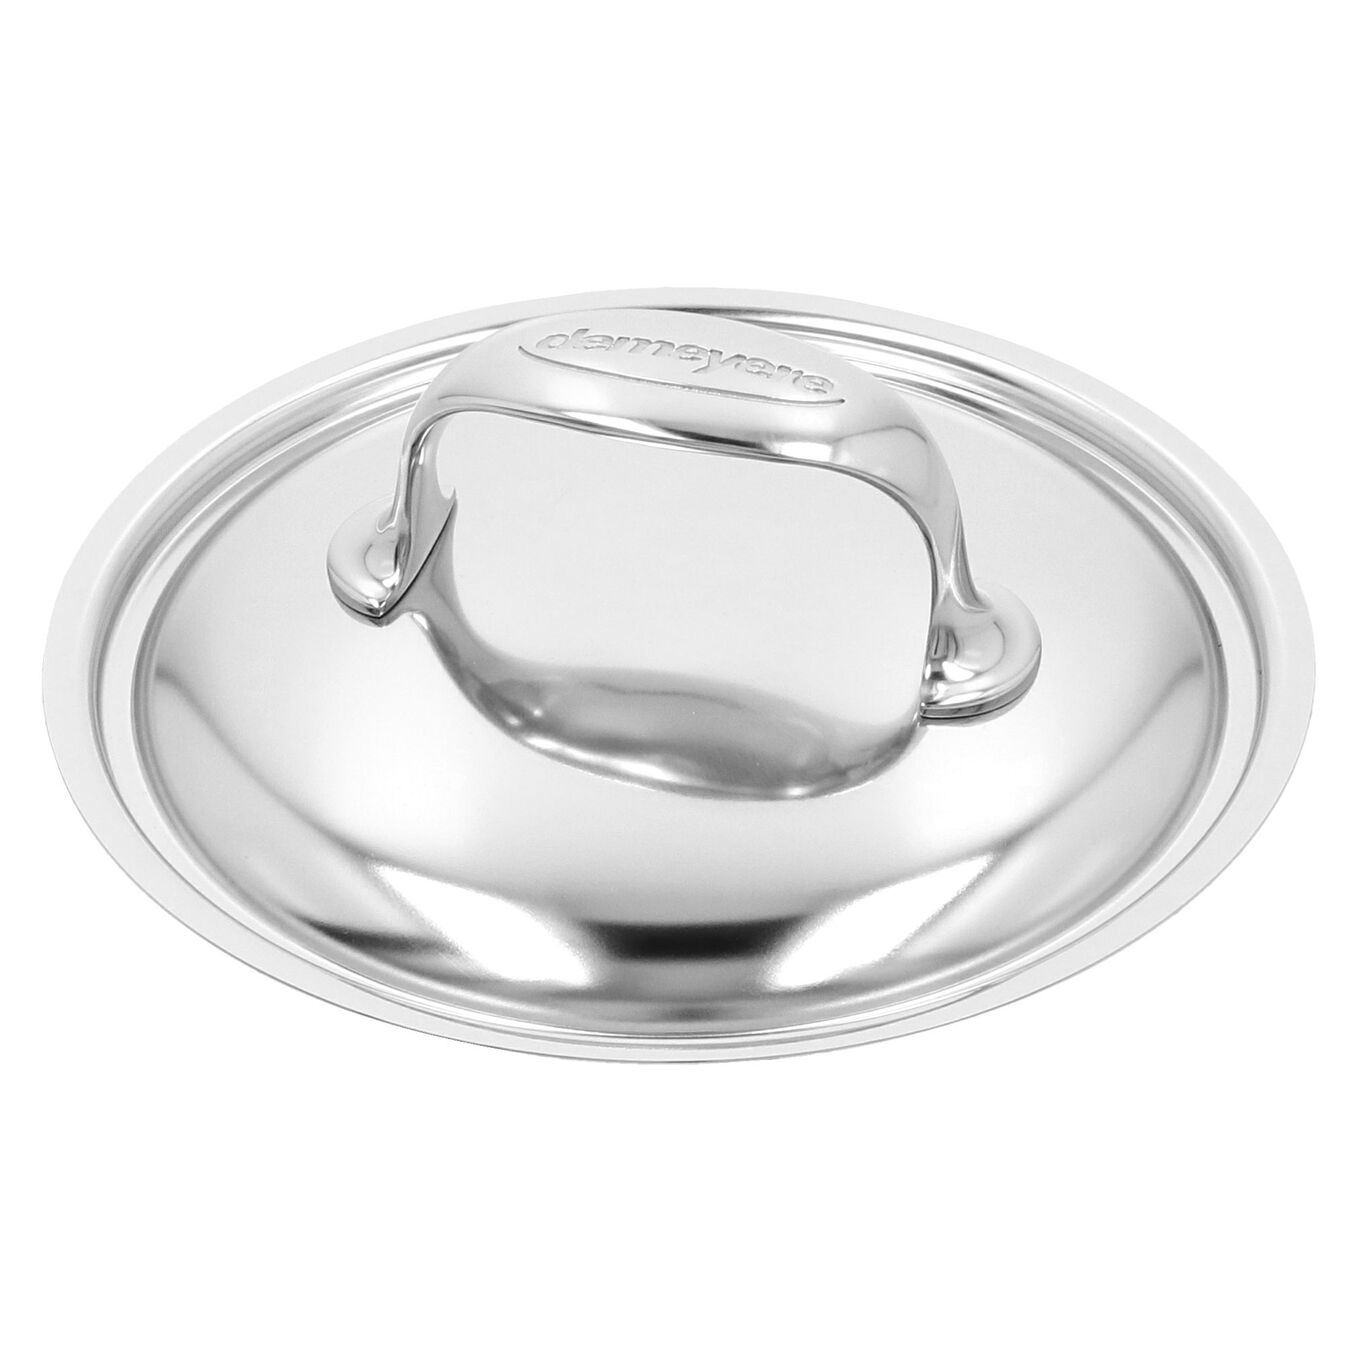 1.5 l 18/10 Stainless Steel round Sauce pan with lid, silver,,large 2